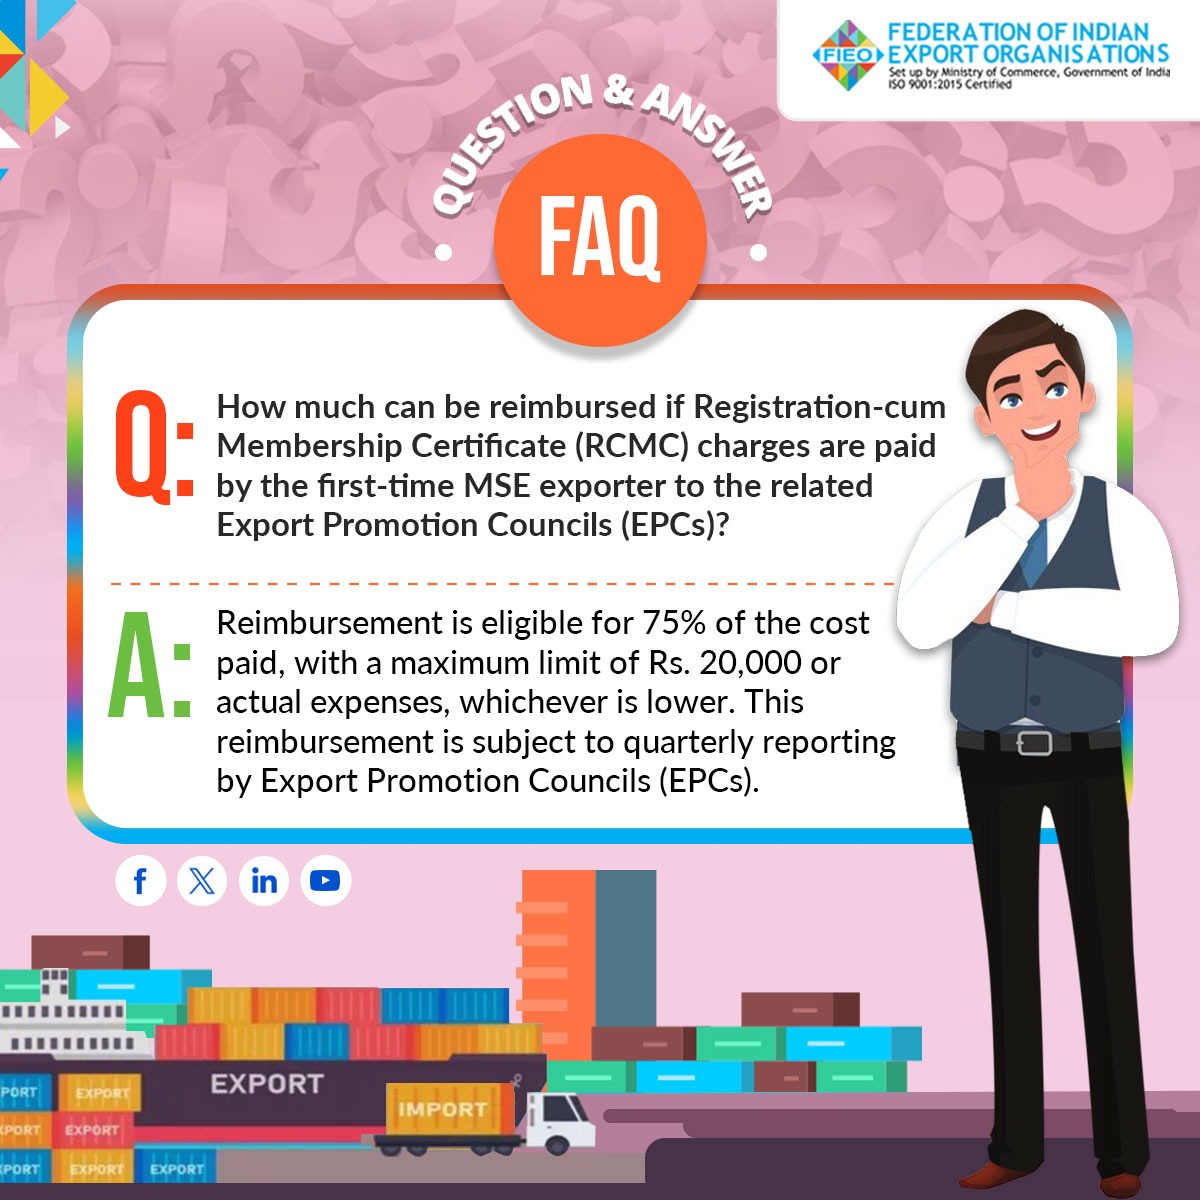 Joining FIEO?🌍Curious about the perks? Check out our FAQs to get answers!

Today's FAQ: How much can be reimbursed if RCMC charges are paid by the first-time MSE exporter to the related Export Promotion Councils (EPCs)?

Visit➡️fieo.org to learn more!

#FIEOFAQs